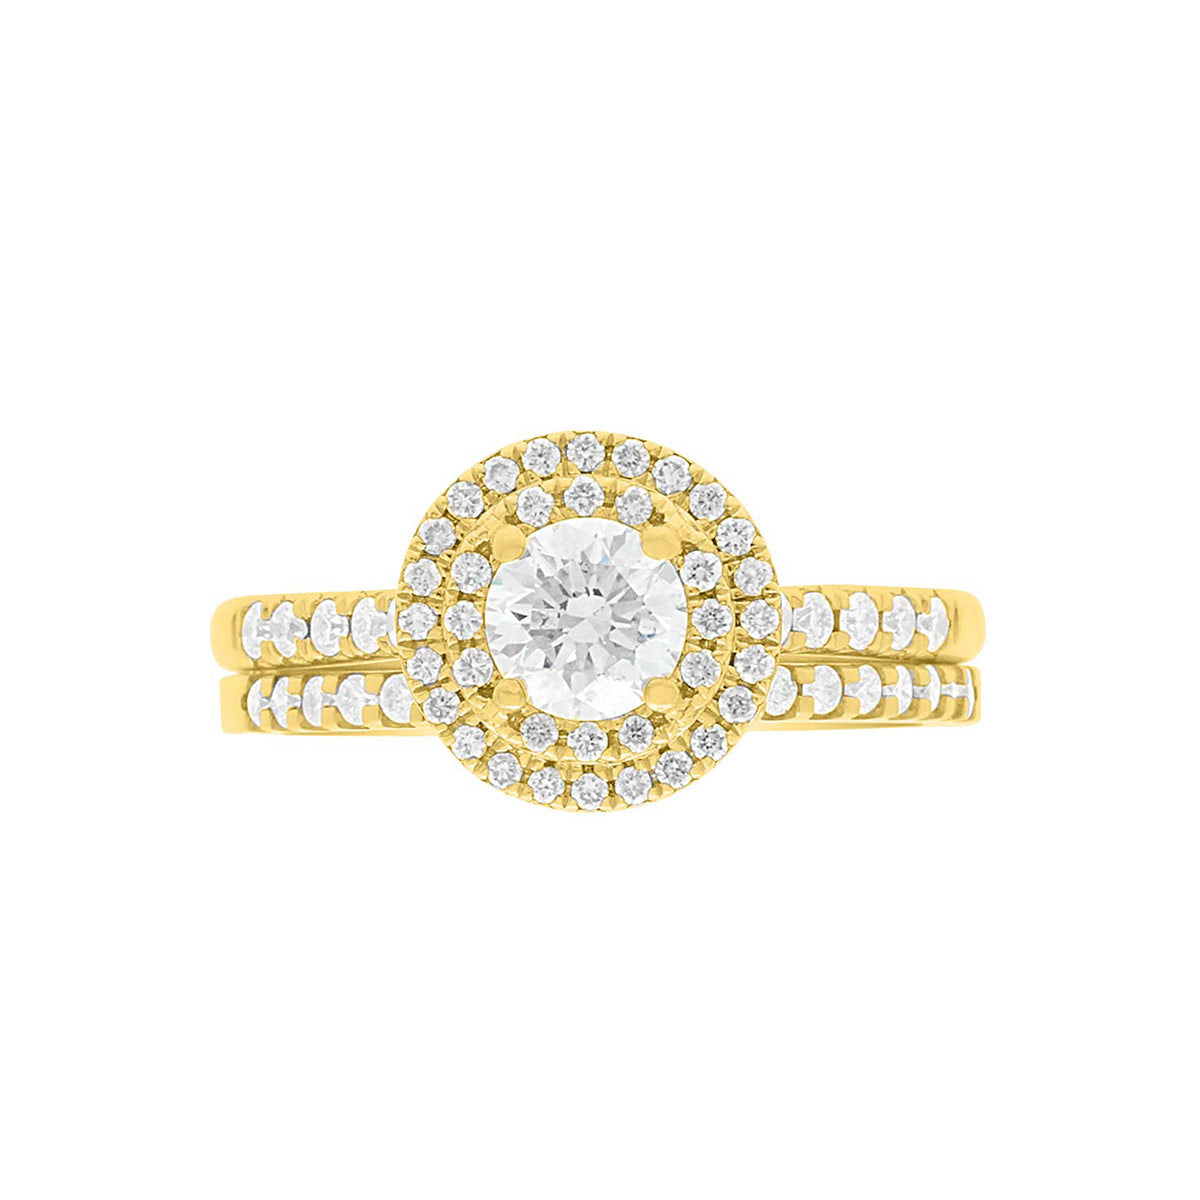 Round Double Halo Engagement Ring made of yellow gold and diamonds, laying flat with a matching diamond wedding ring